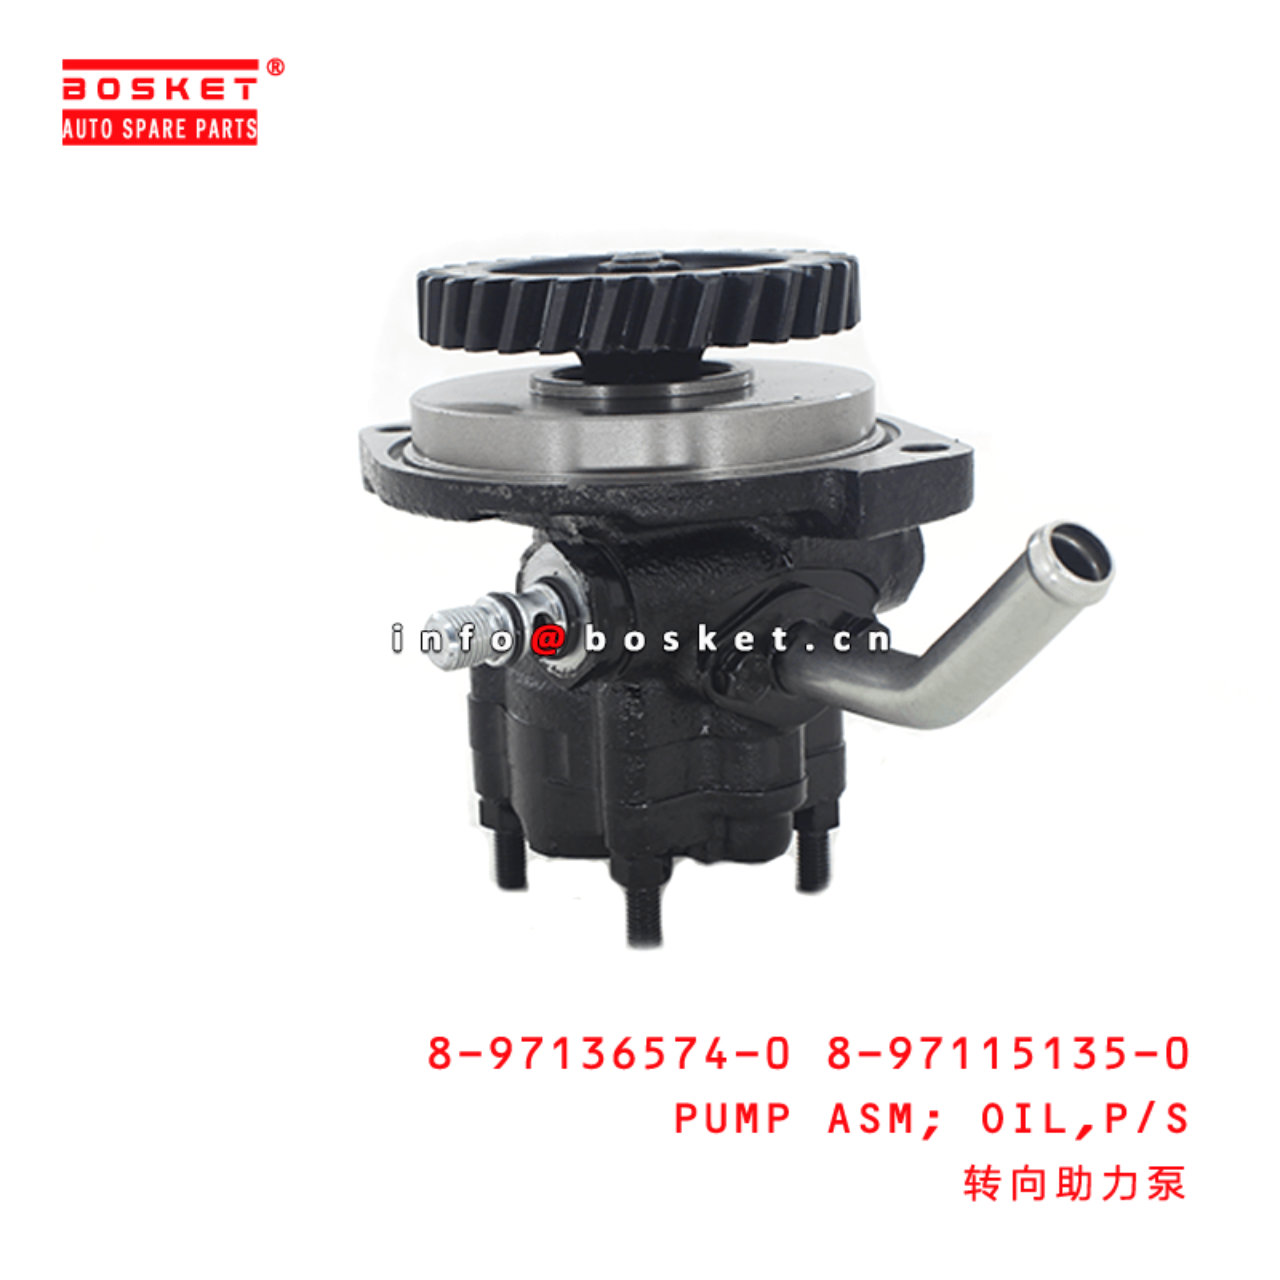 8-97136574-0 8-97115135-0 Oil Power Steering Pump Assembly 8971365740 8971151350 Suitable for ISUZU 